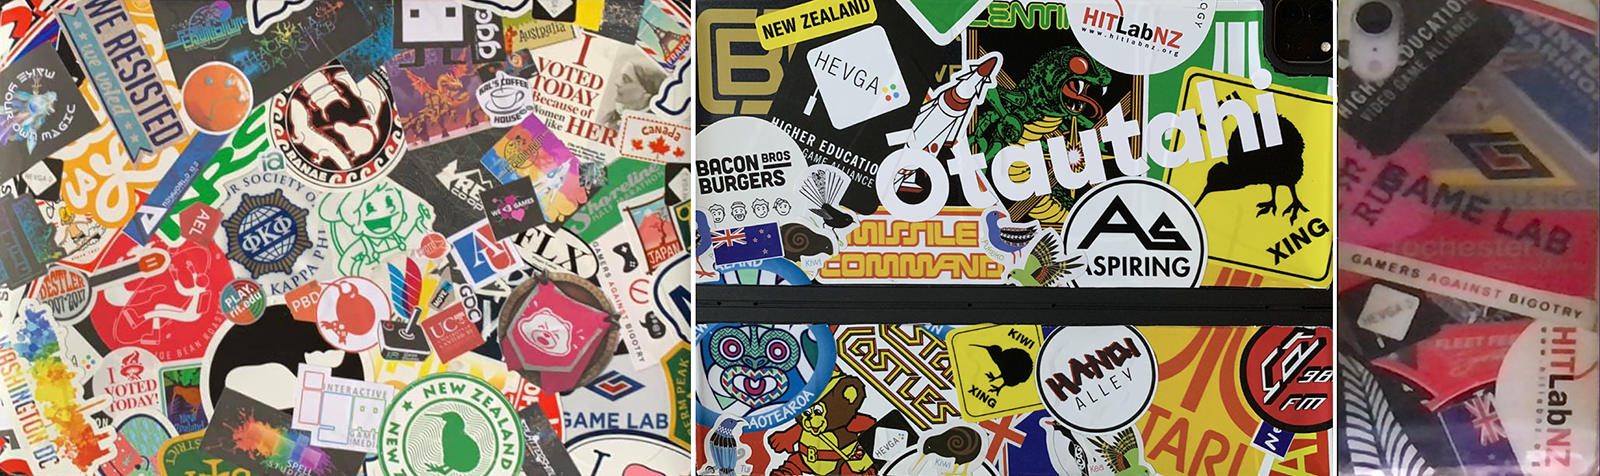 image of computer sticker collage